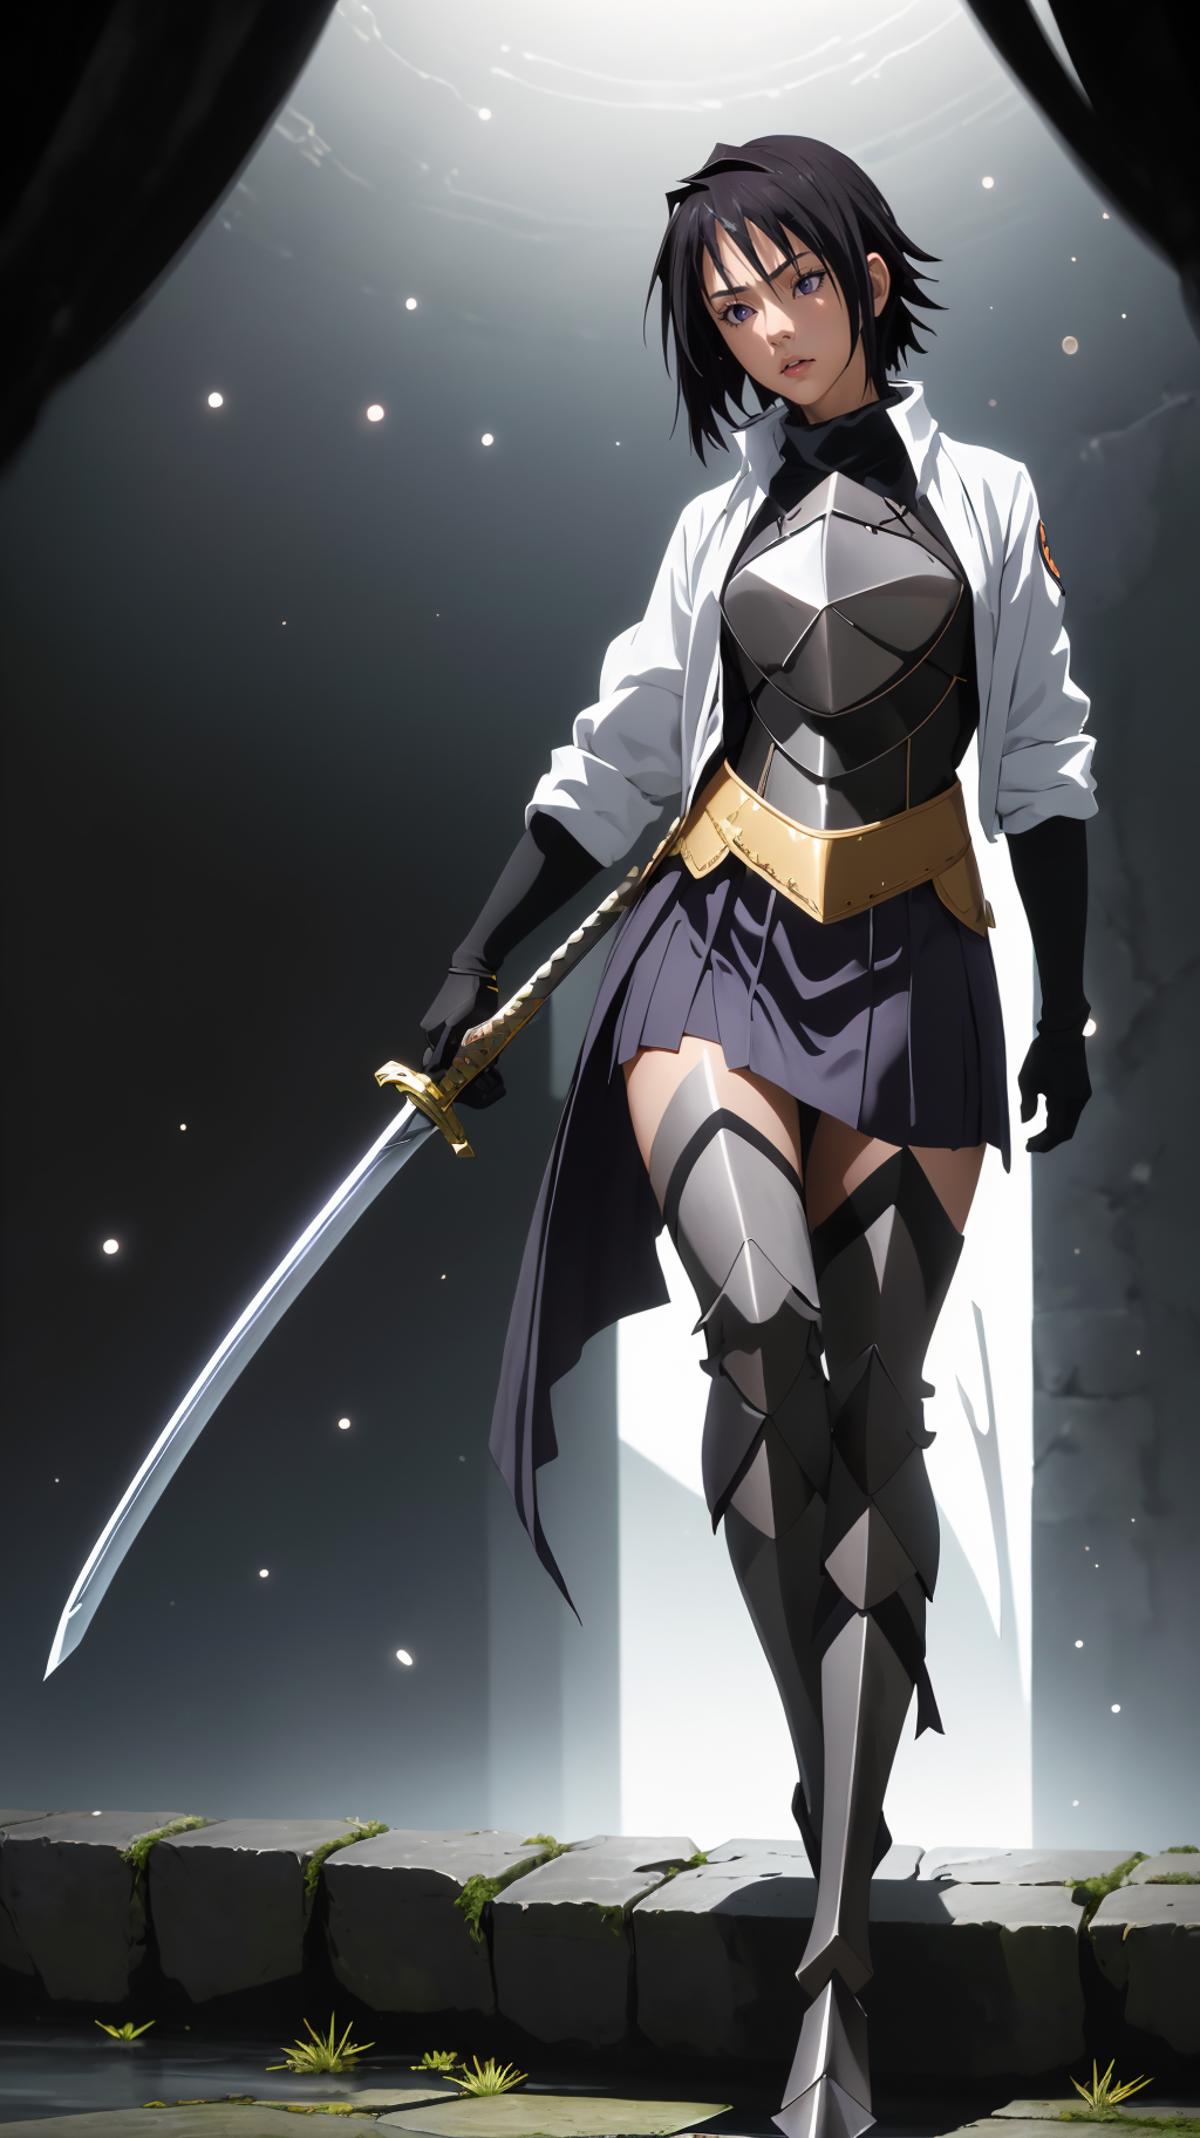 Anime-style character with sword and shield, wearing a skirt.